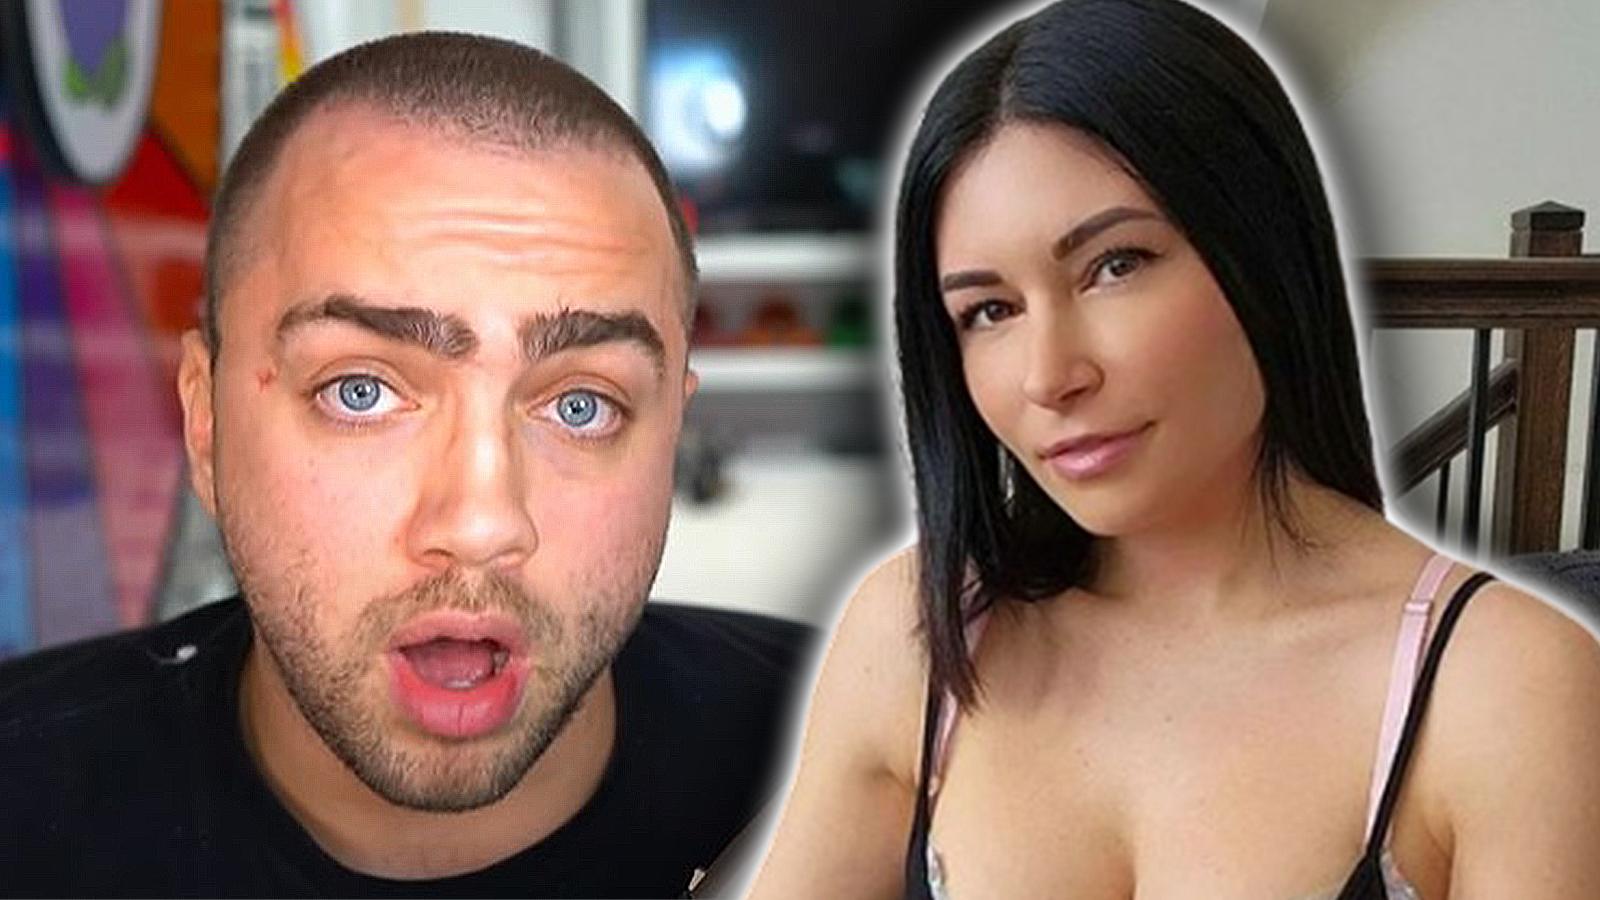 mizkif-hits-out-at-twitch-over-alinity-ban